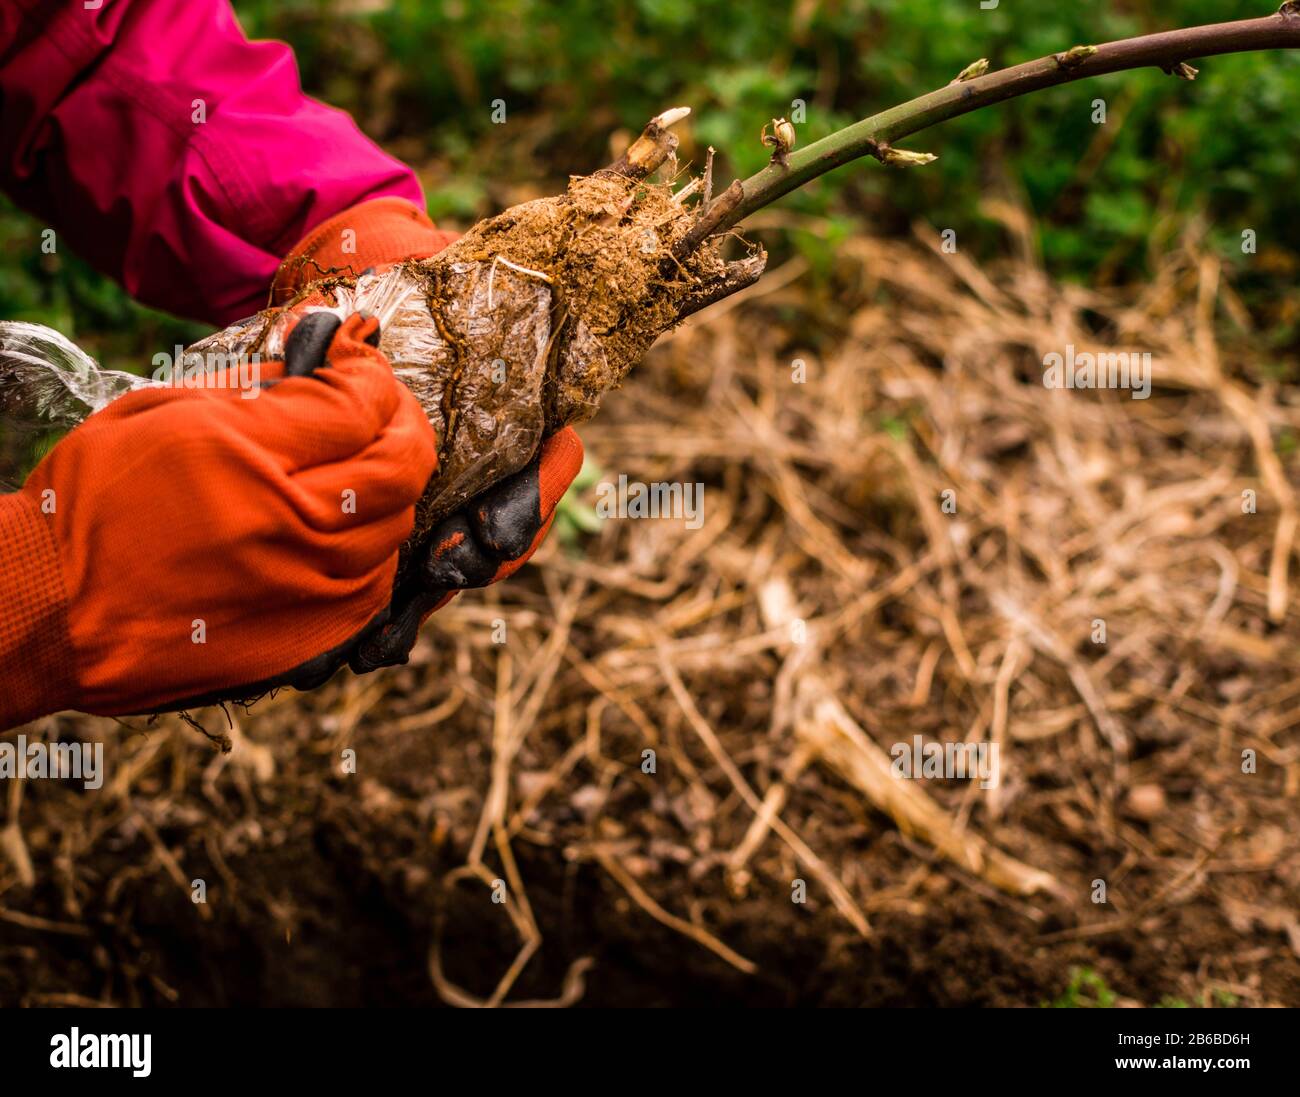 A young woman planting an bilberry tree in the garden near the house Stock Photo